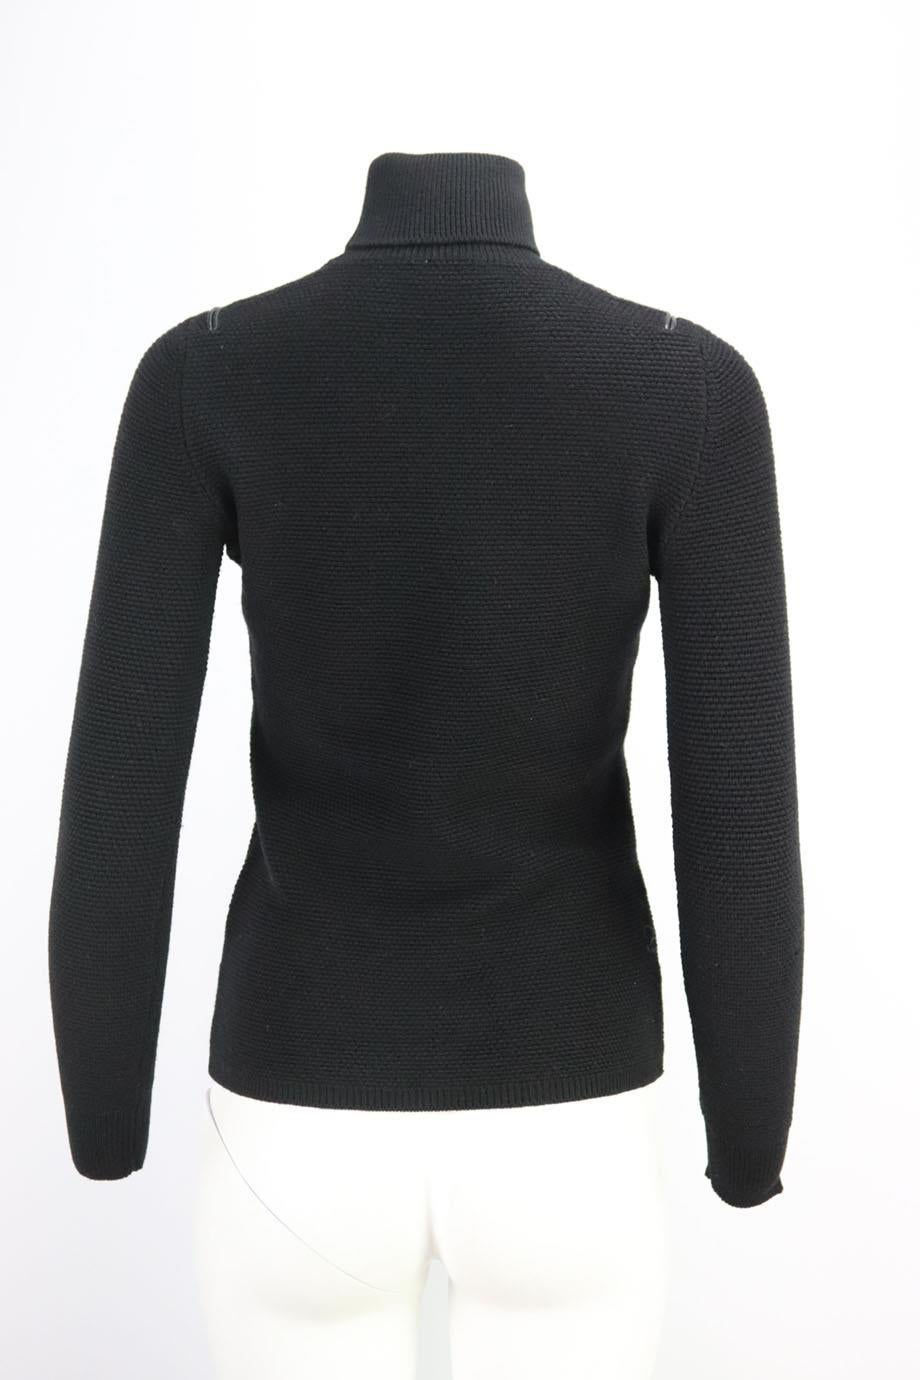 tom ford sweater